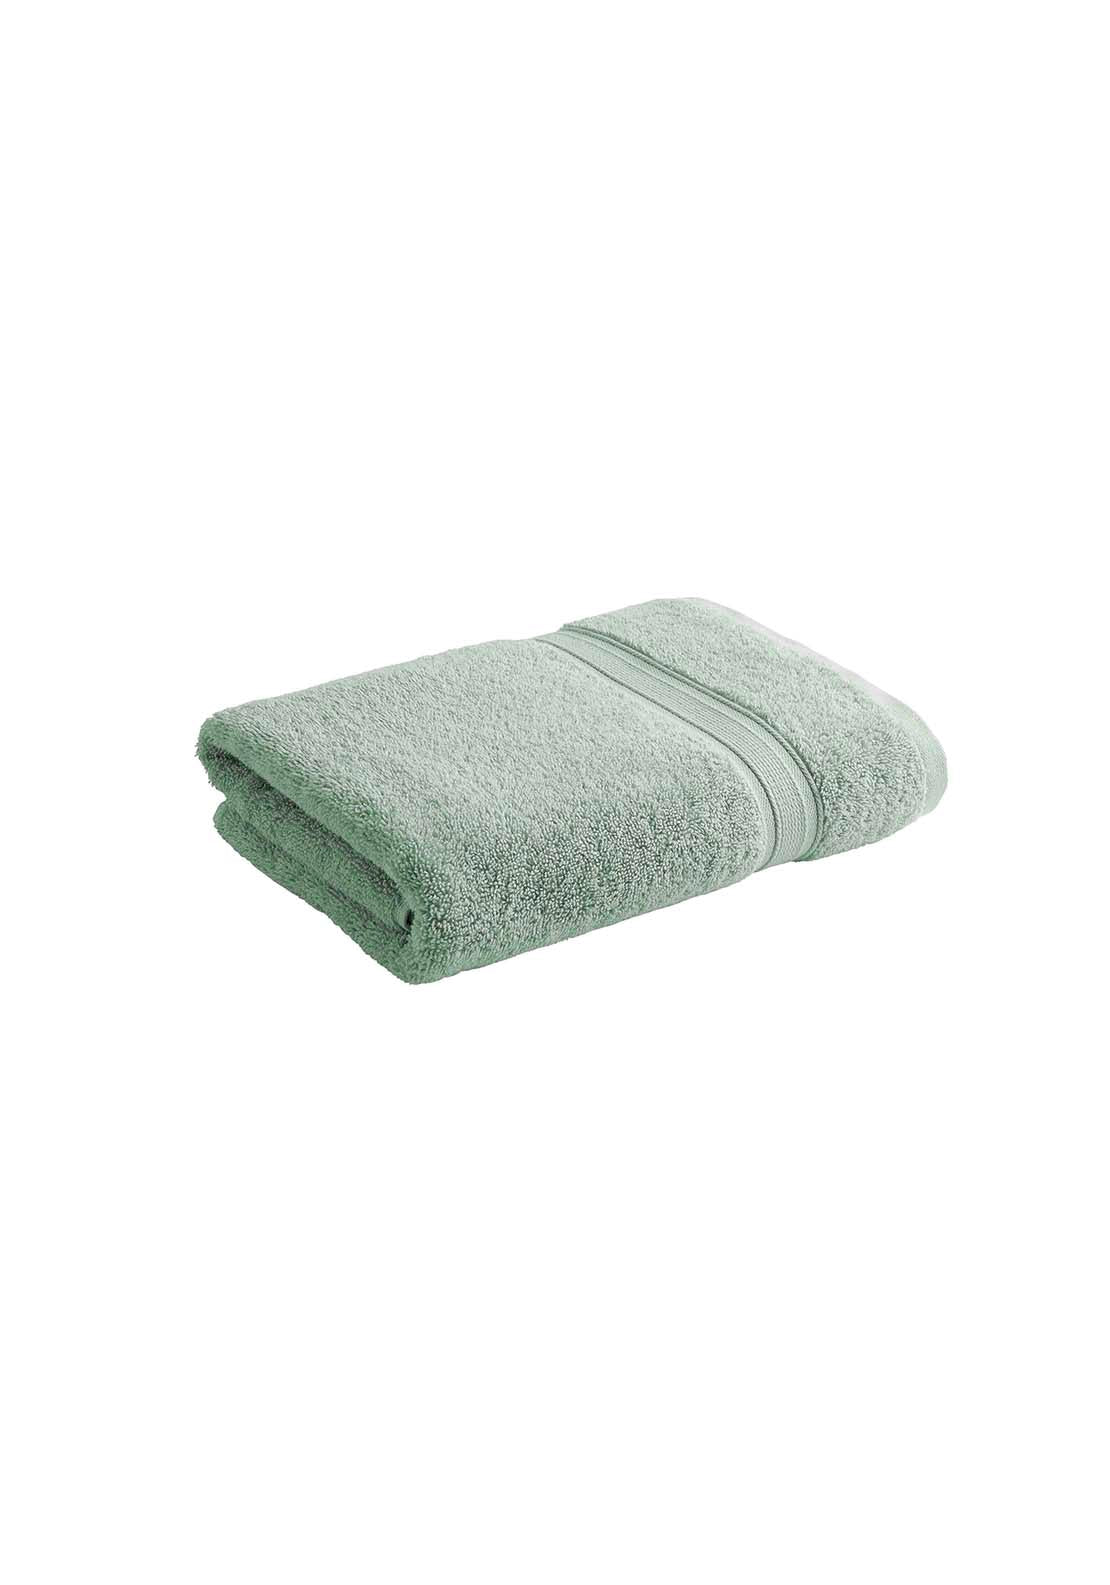 Christy Serene Hand Towel - Duck Egg 1 Shaws Department Stores